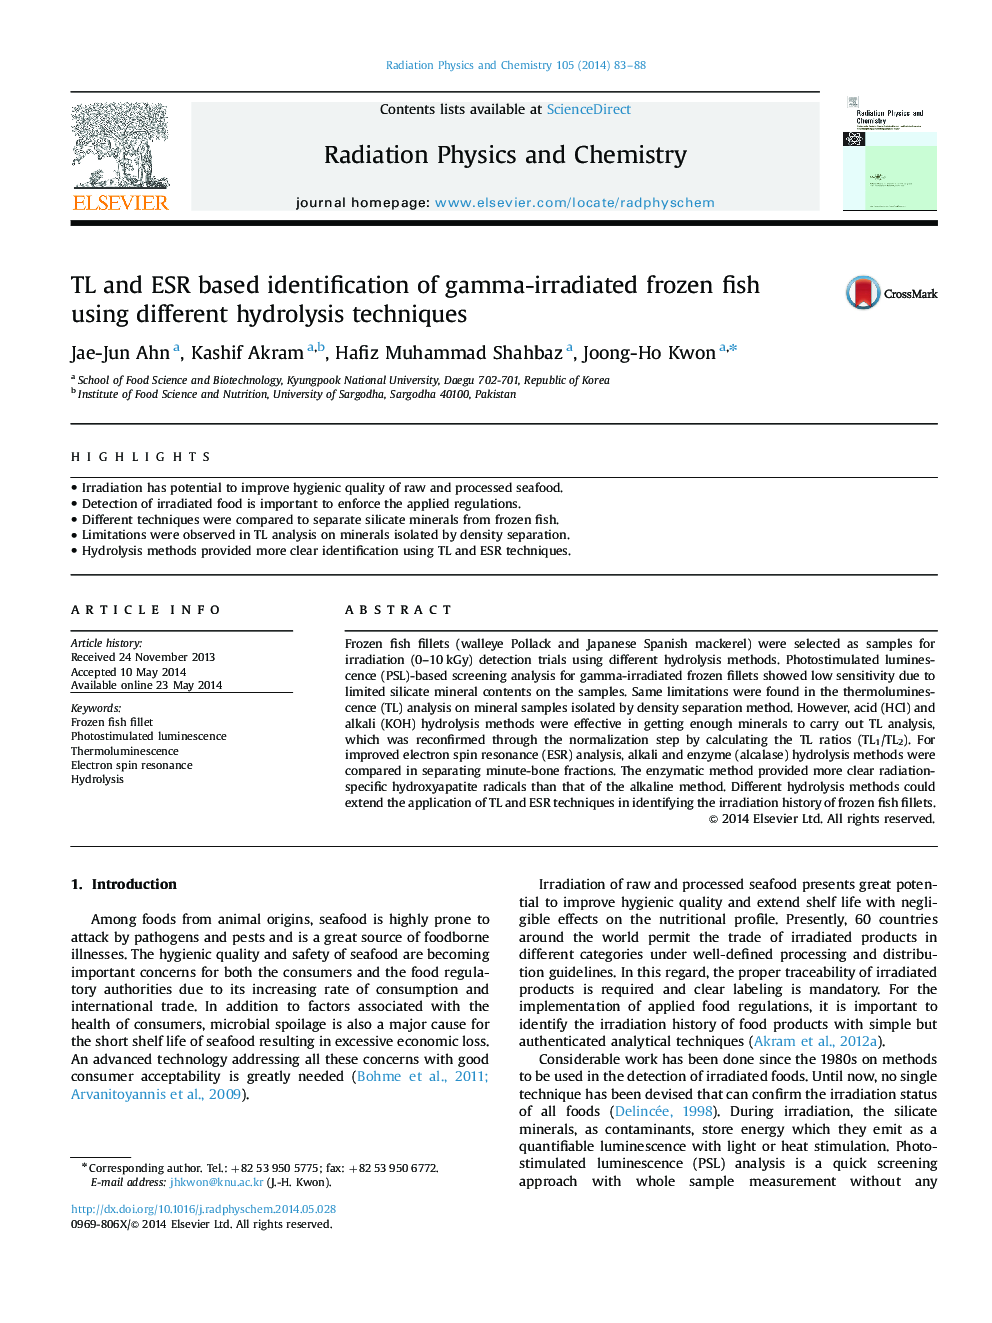 TL and ESR based identification of gamma-irradiated frozen fish using different hydrolysis techniques